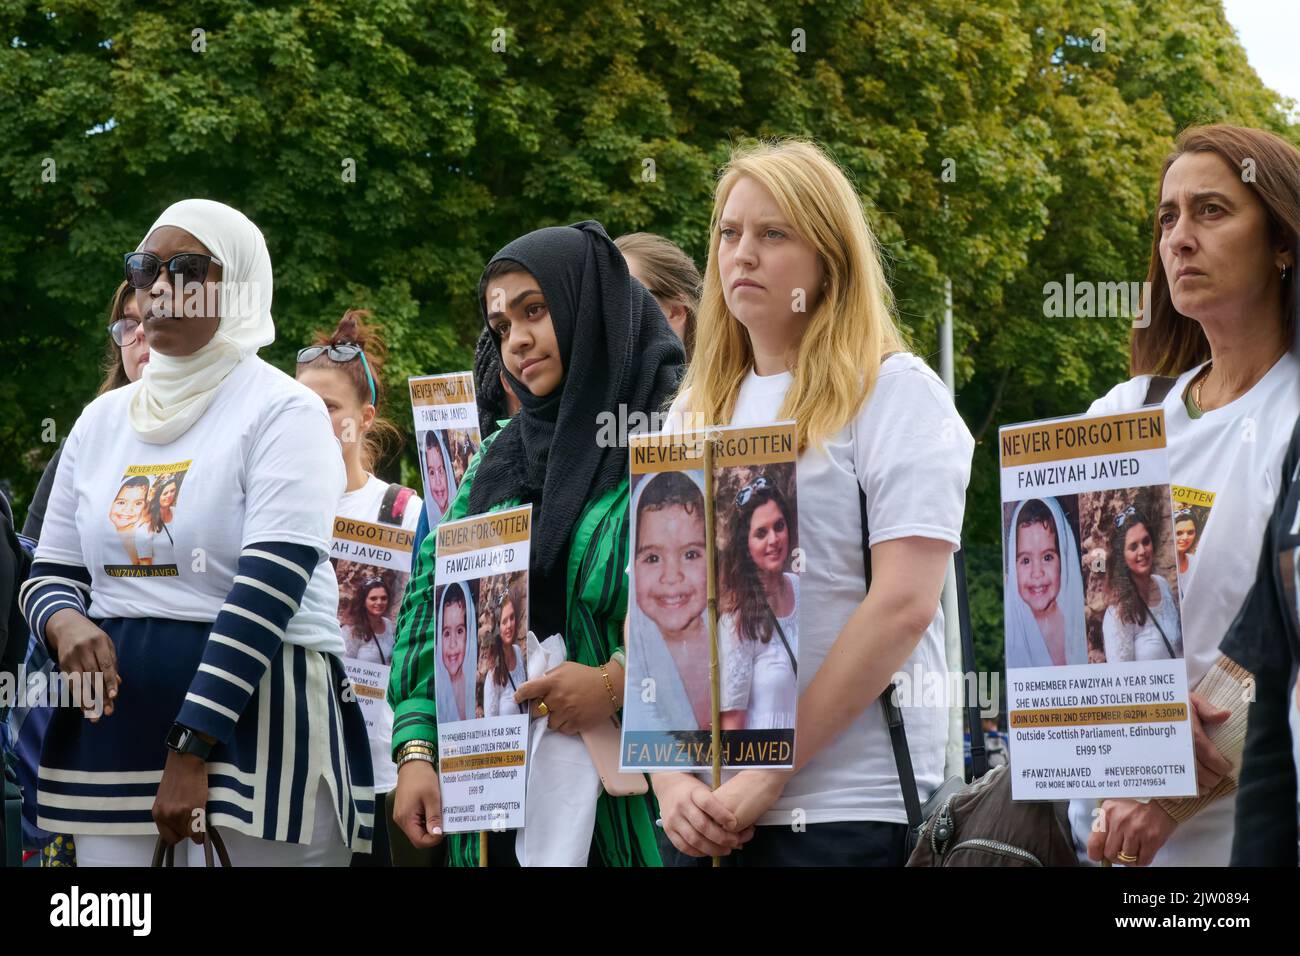 Edinburgh Scotland, UK 02 September 2022. People participate in a vigil at the Scottish Parliament for Fawziyah Javed on the anniversary of her death. credit sst/alamy live news Stock Photo